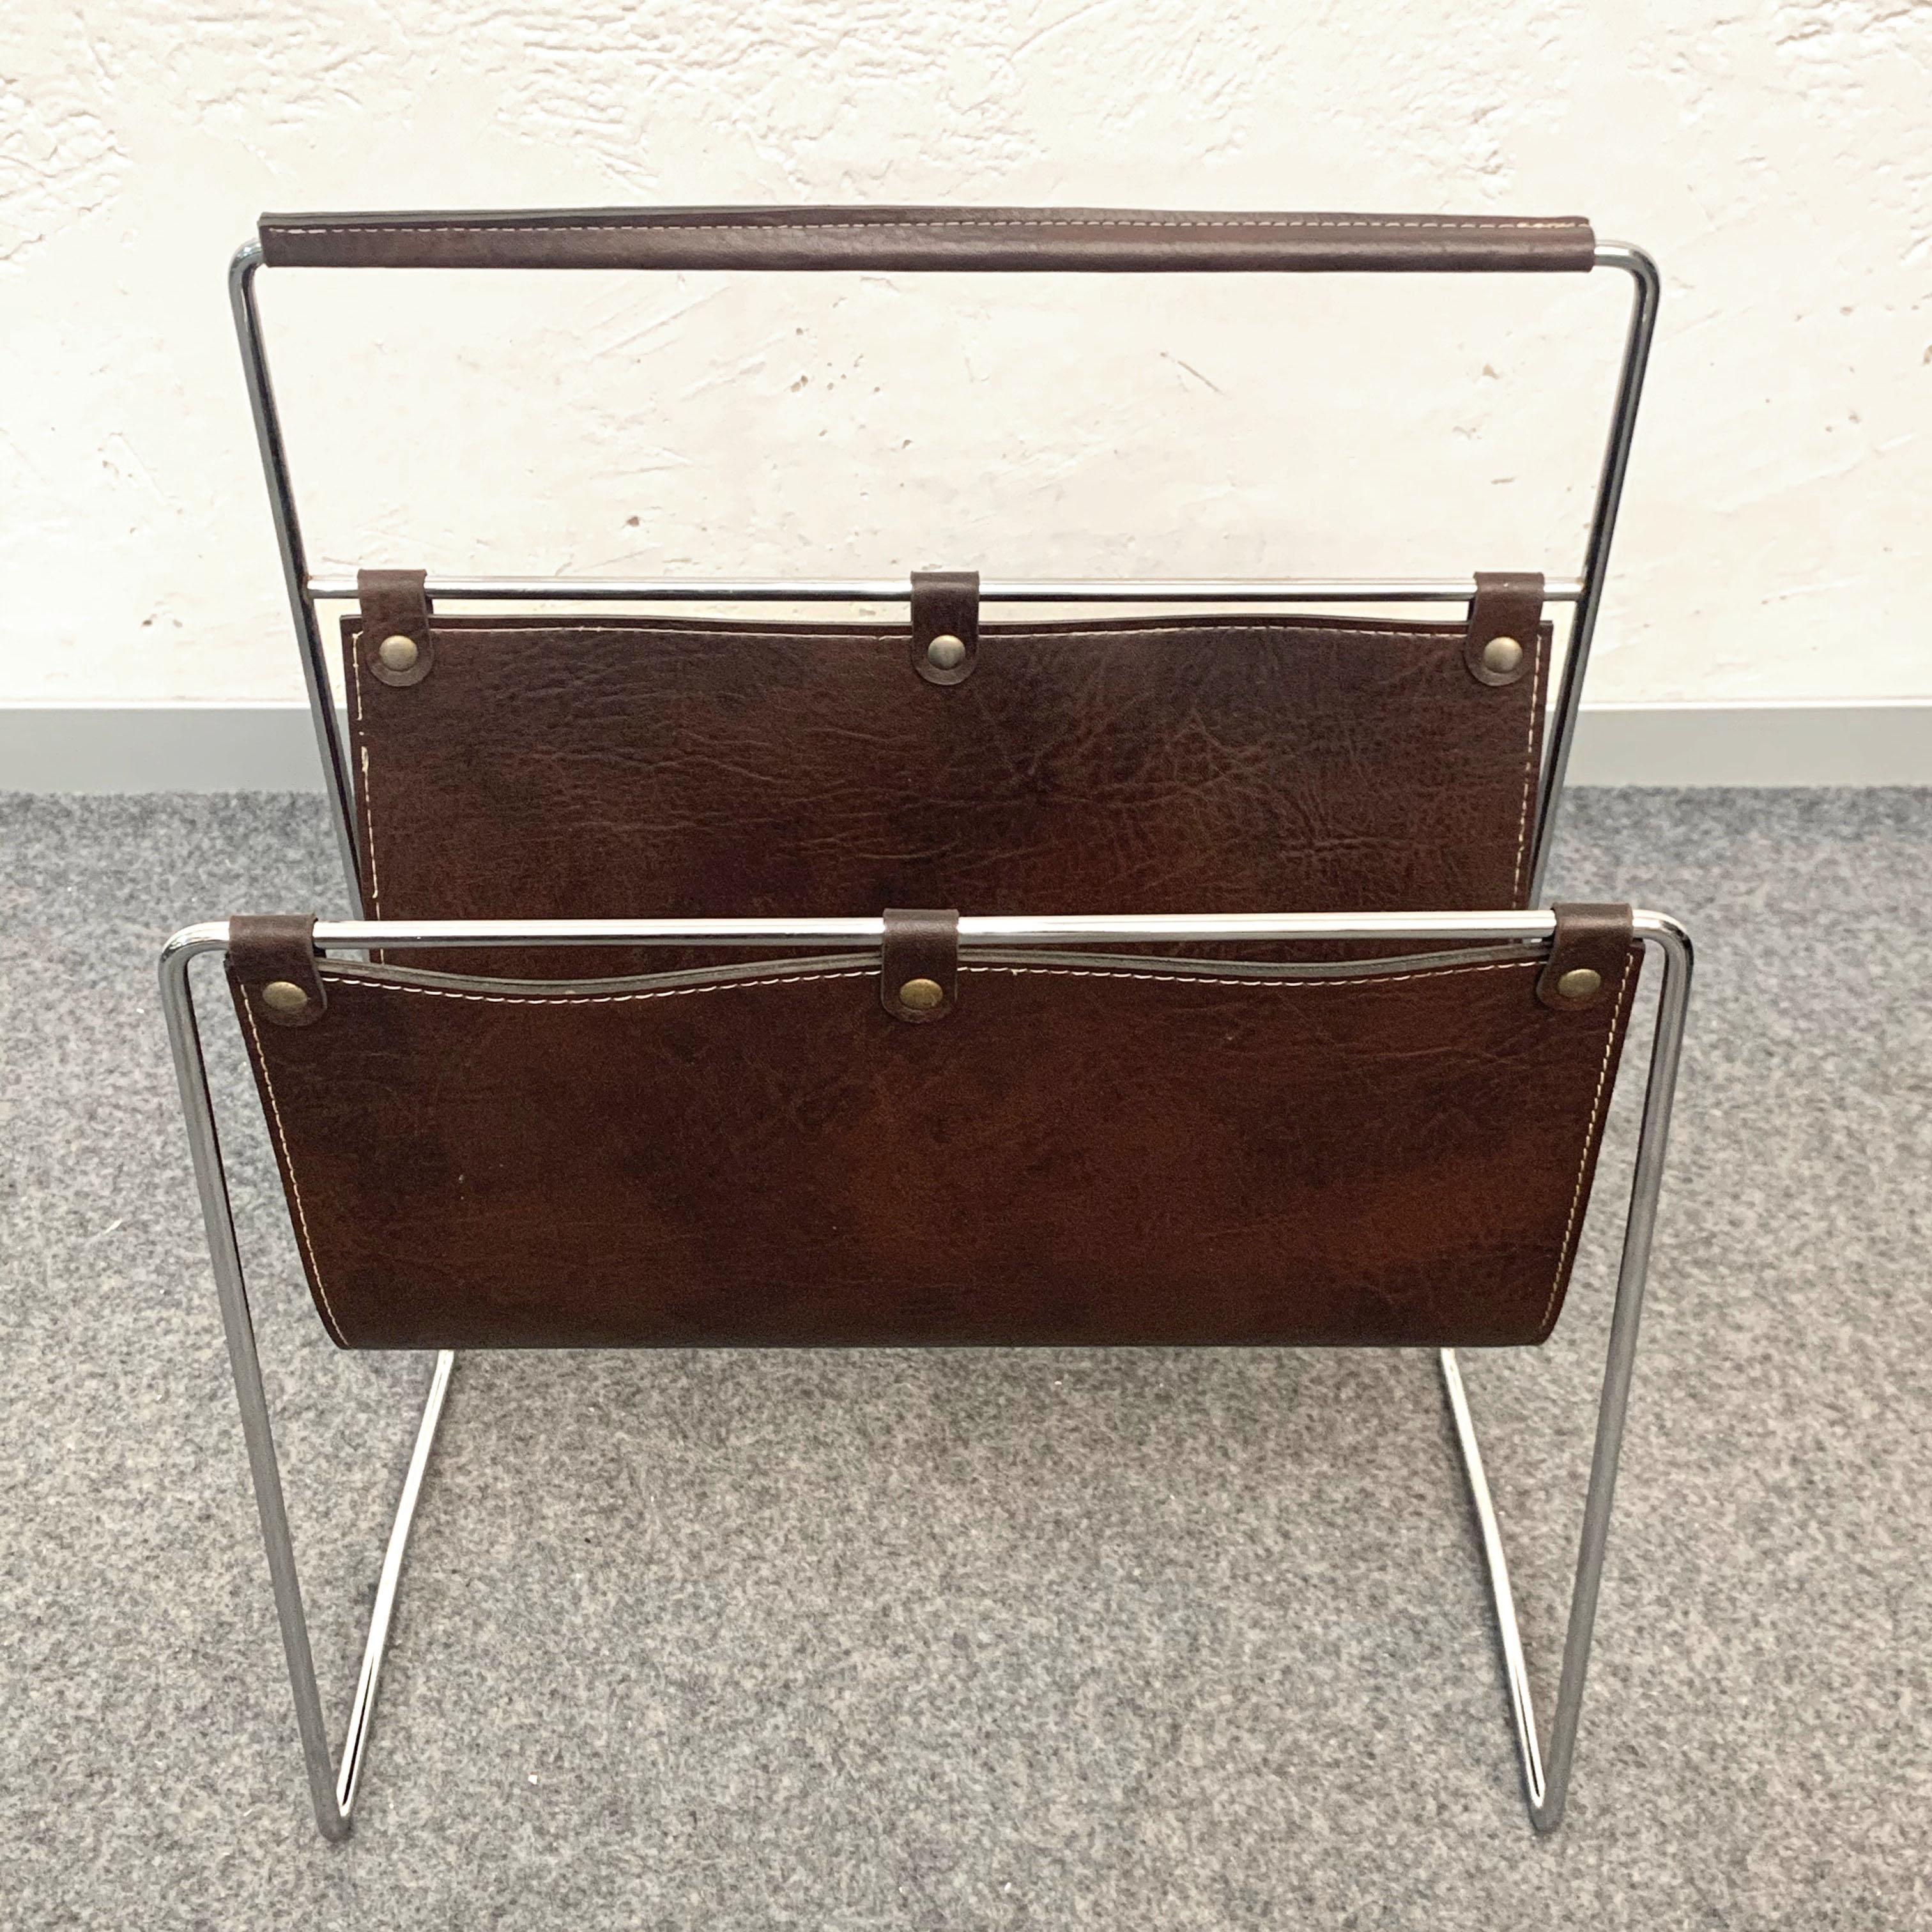 Late 20th Century Midcentury Chromed Steel and Leather French Magazine Rack after Adnet, 1970s